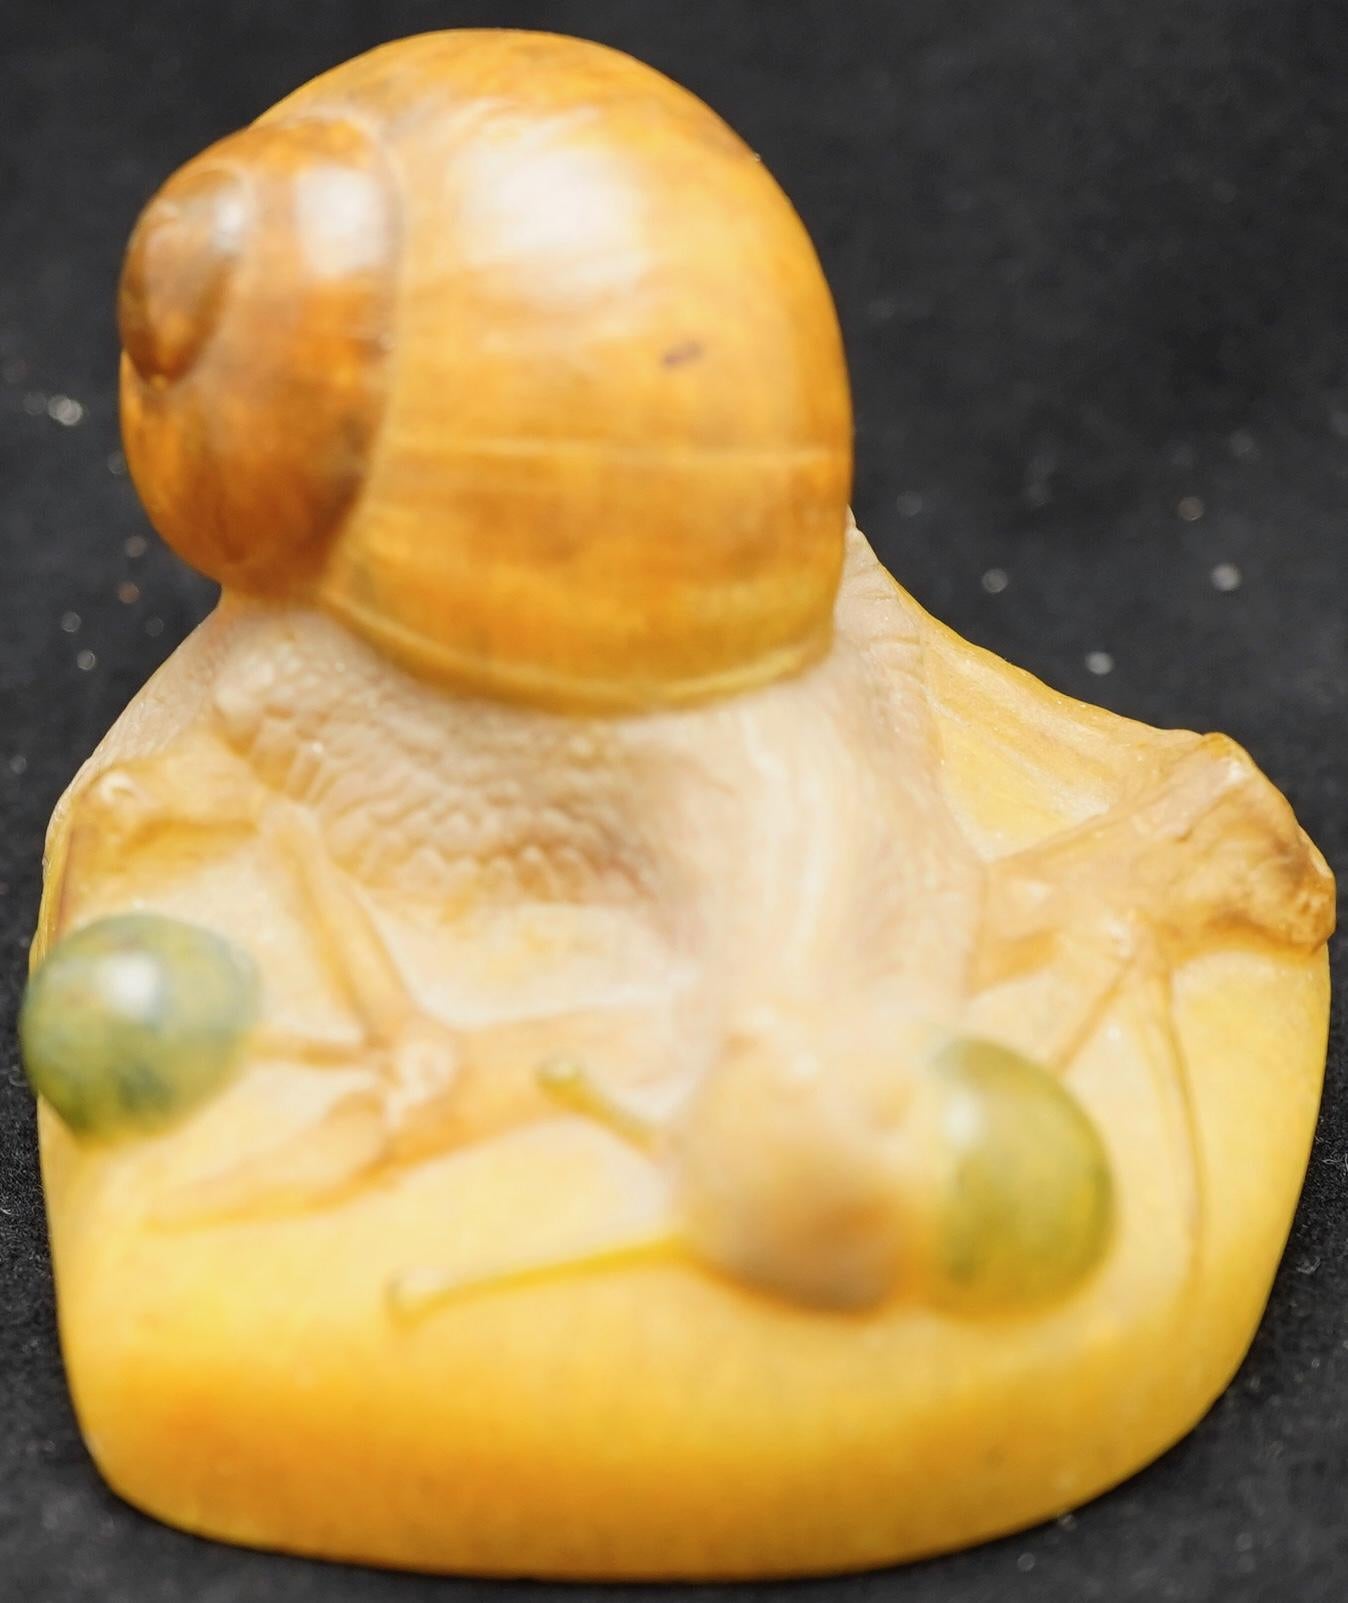 
Pate de verre Snail paperweight by Almeric Walter and Henri Berge, 1905.
Great example of Art Nouveau executed in naturalistic style for Daum factory., Signed in the mold by the maker and the sculptor.
